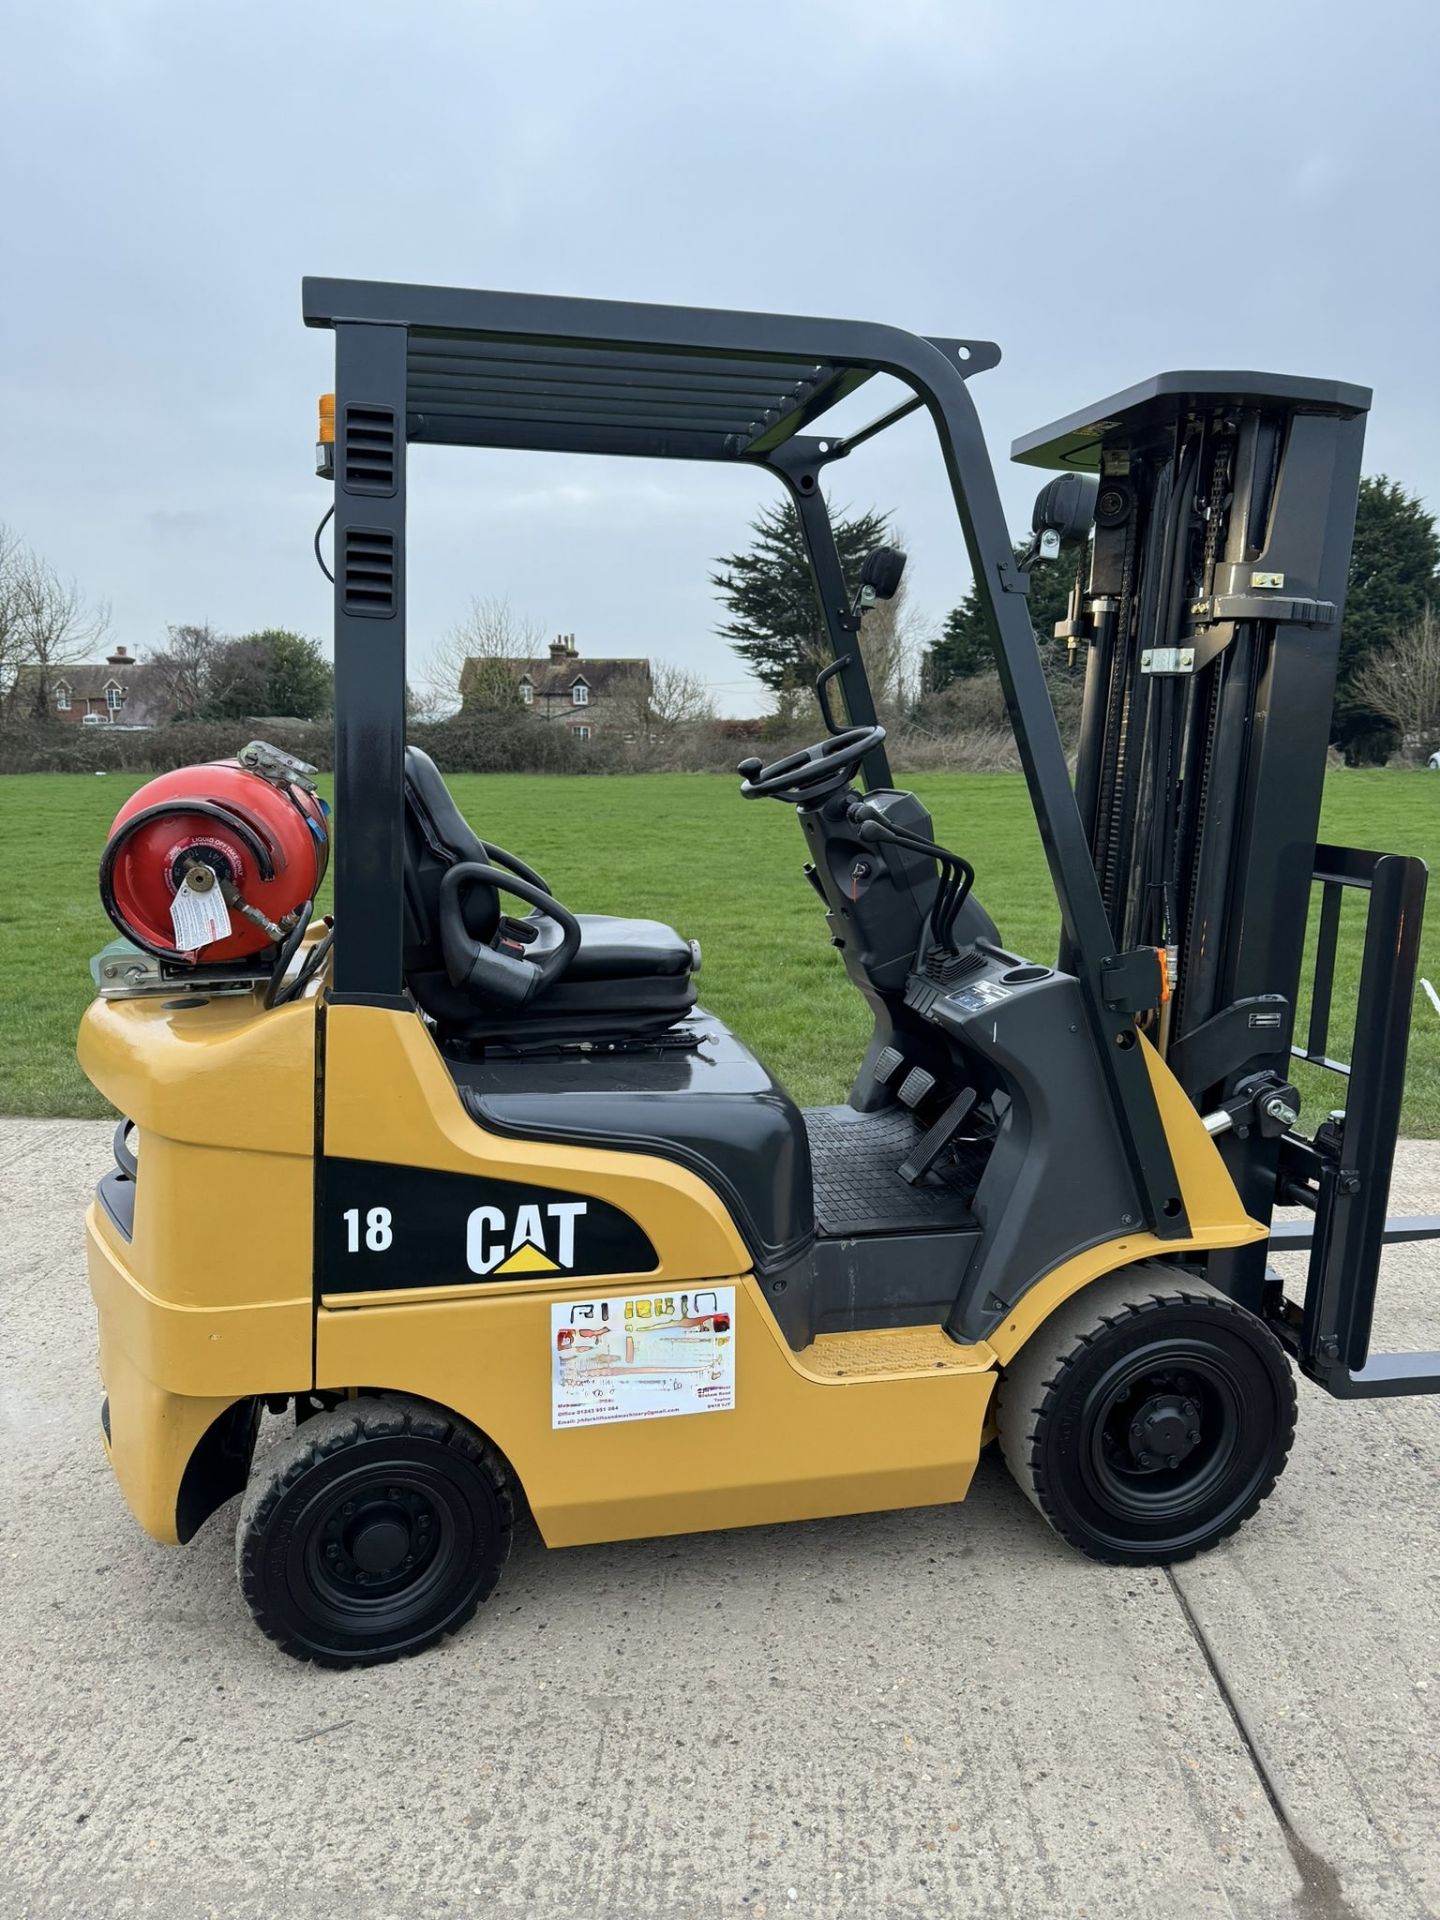 2018 CATERPILLAR 1.8 Tonne Gas Forklift Truck (Container) Triple Mast - Image 3 of 9